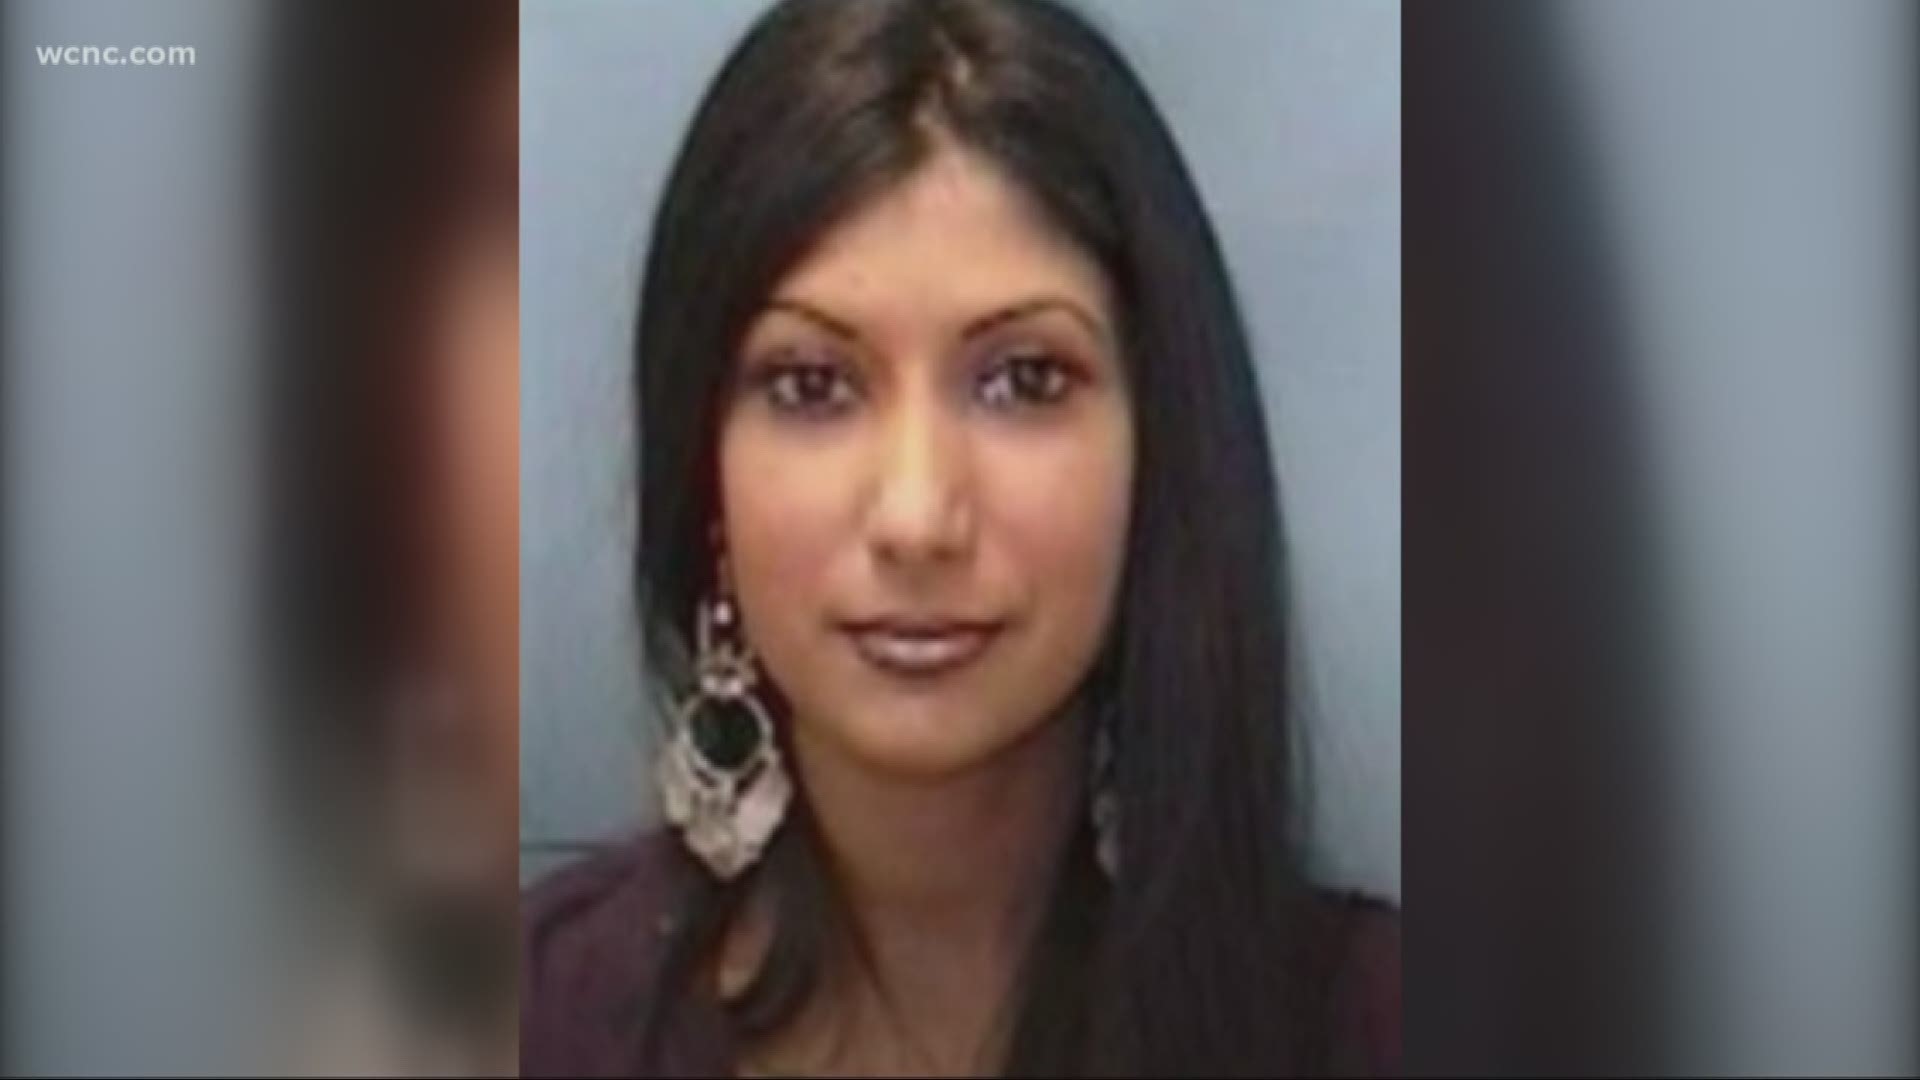 Police said that 39-year-old Vatsla Watkins was last seen on Monday, March 18 driving a 2004 Mercedes-Benz. Her car was found near a marina on Lake Wylie.